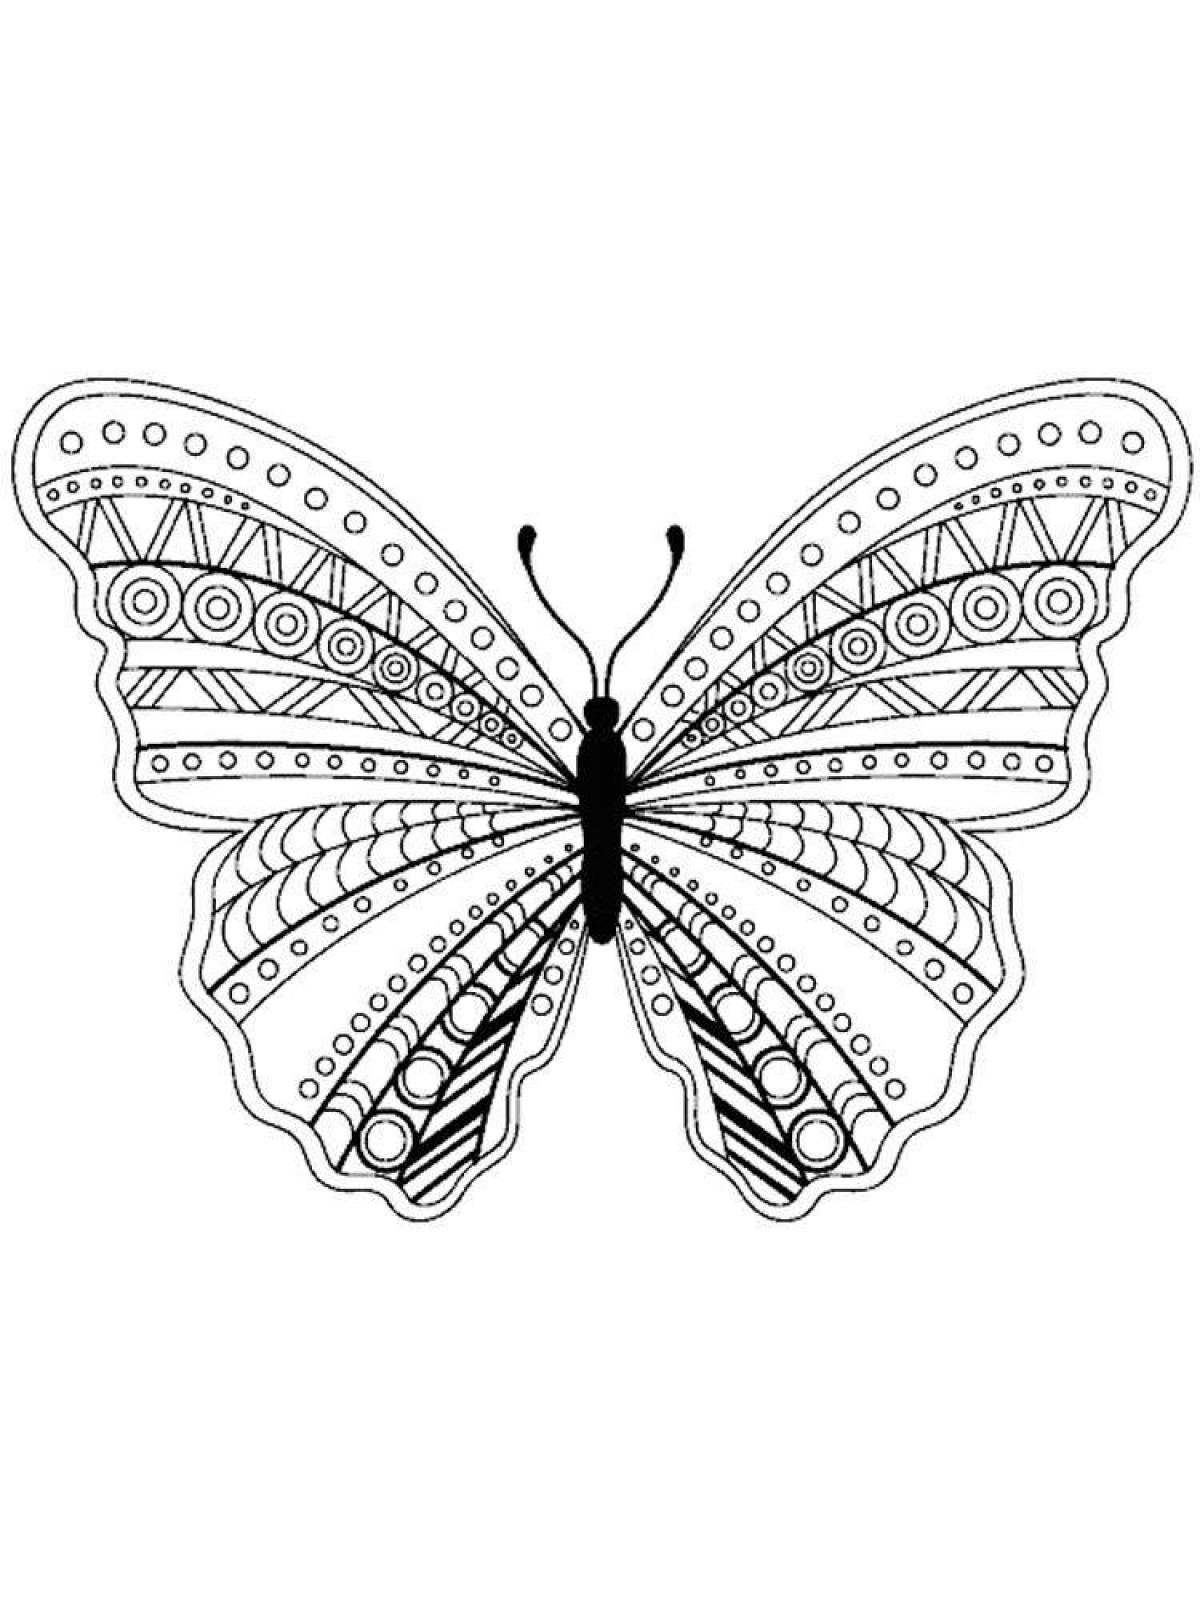 Great anti-stress butterfly coloring book